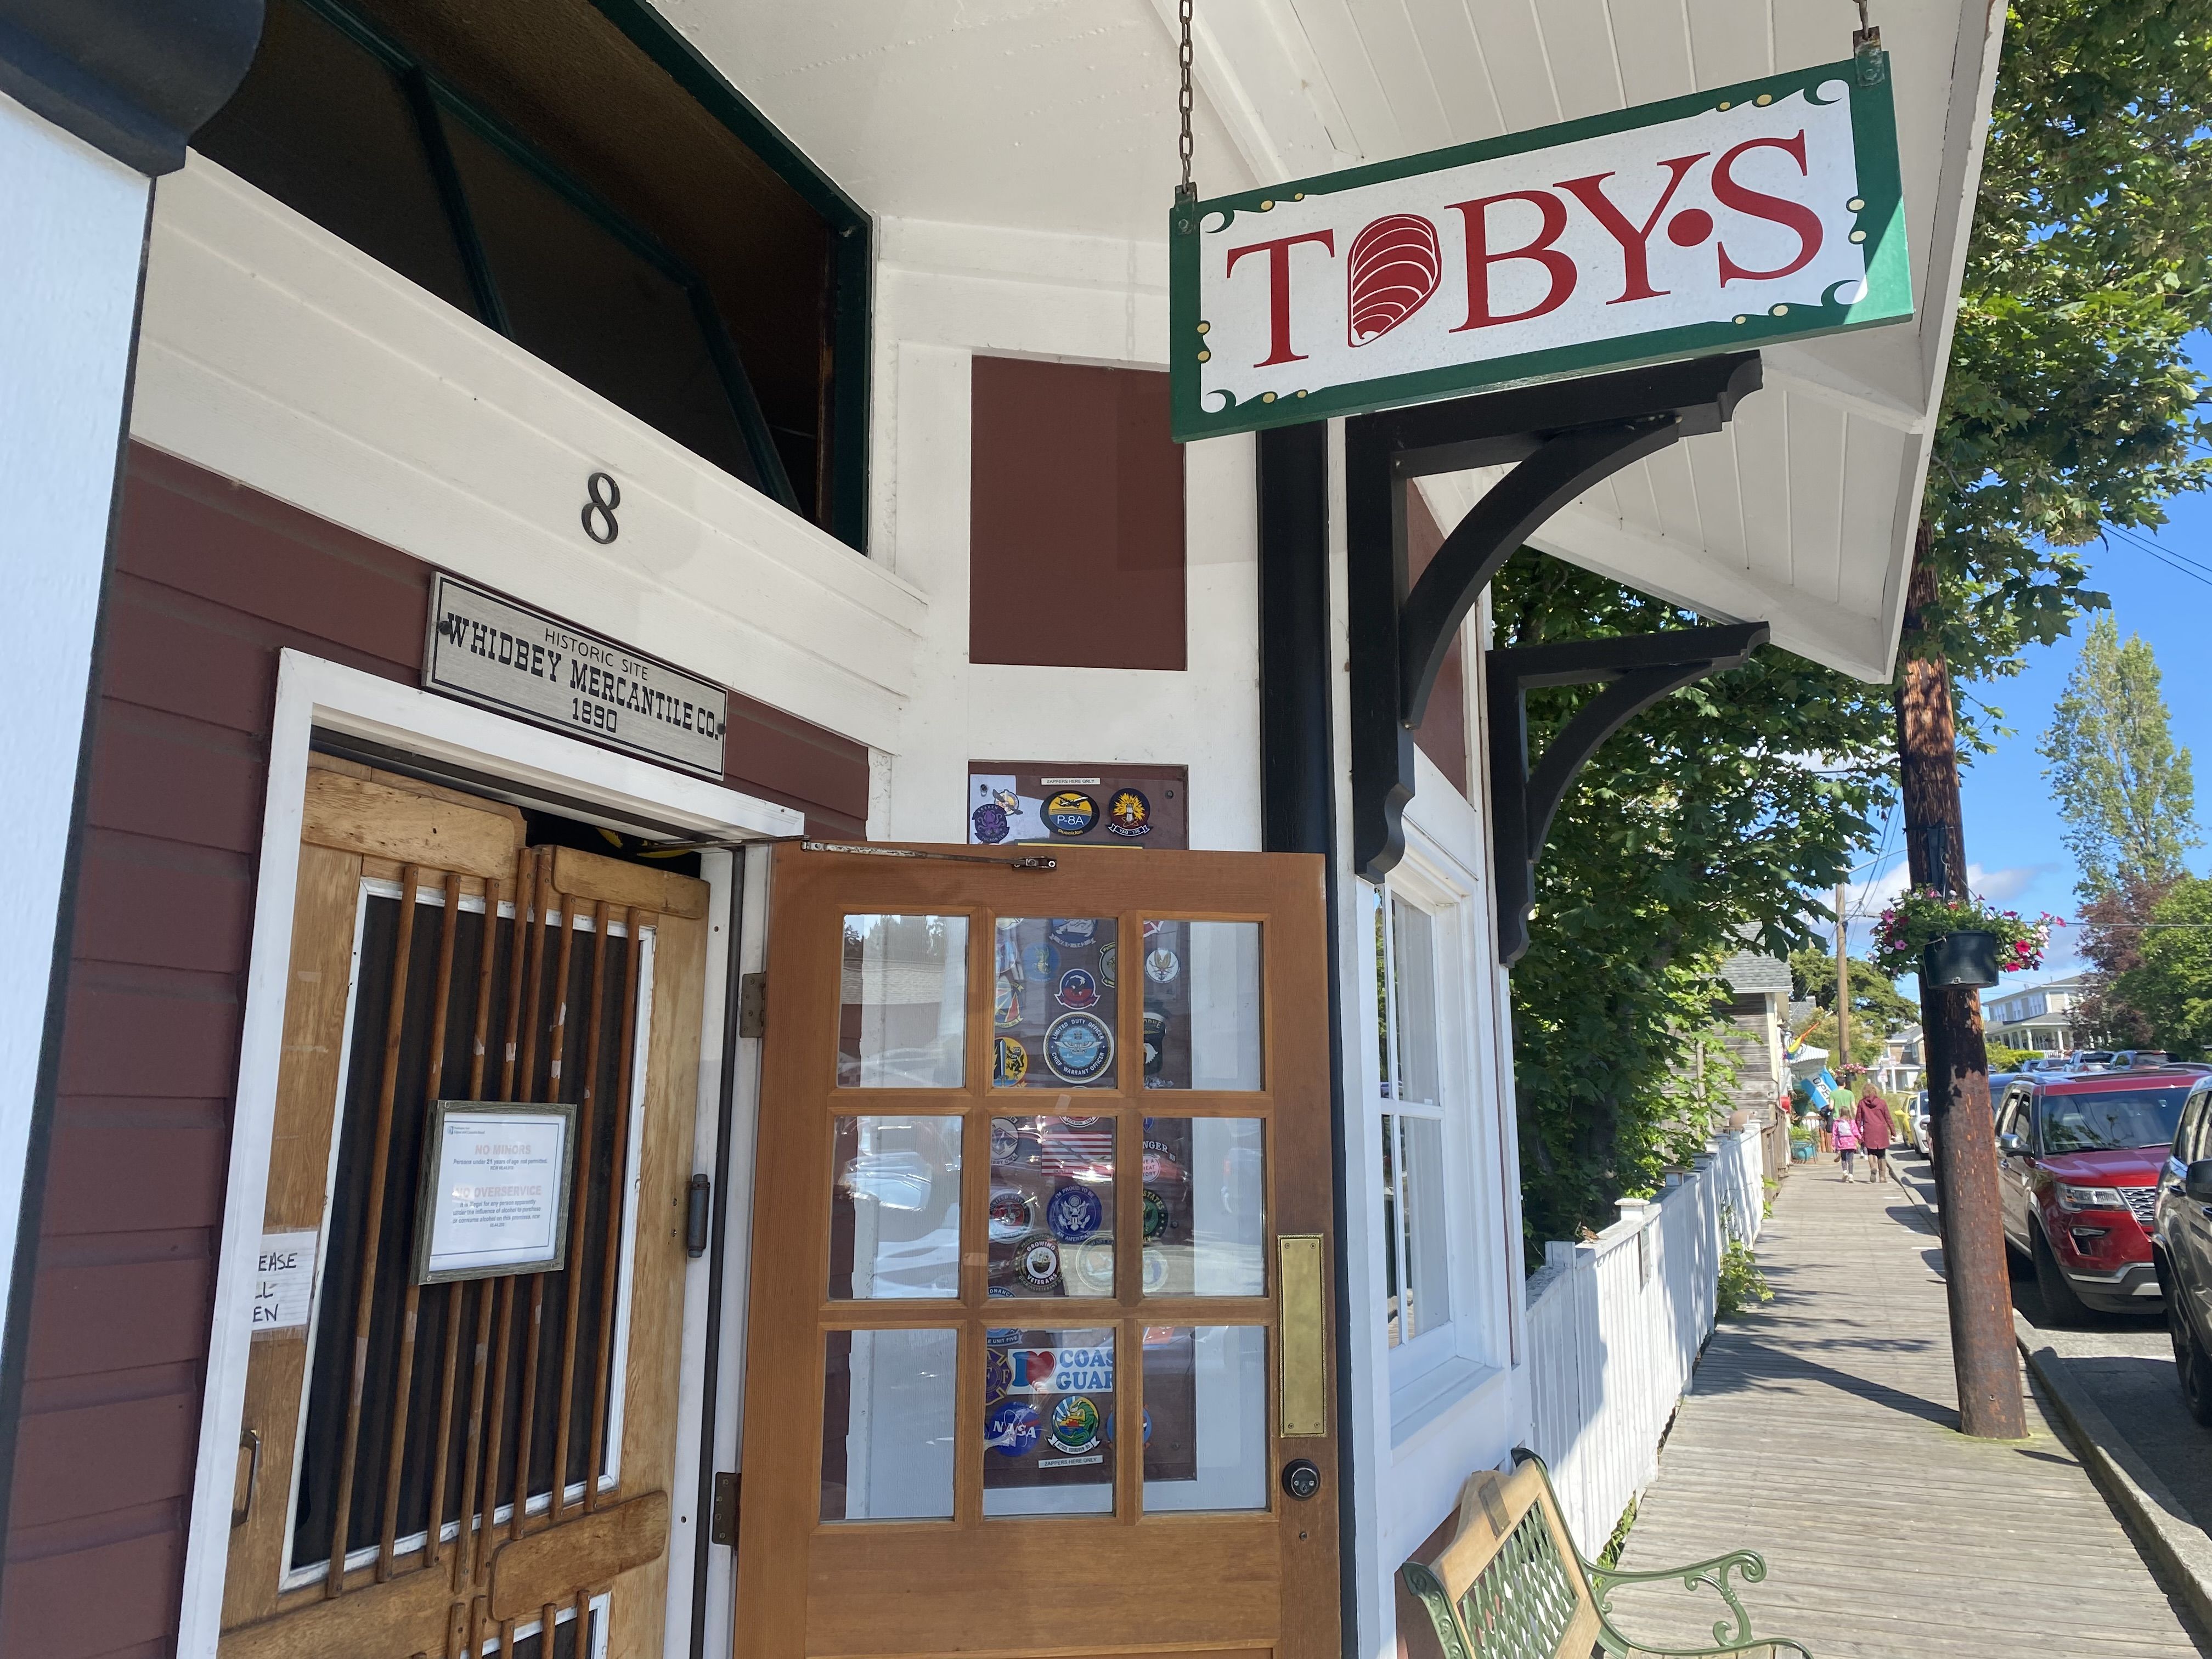 A view of an open door to a painted building with a hanging sign that reads "Toby's" in red letters, with the 'O'  in the shape of a shell.